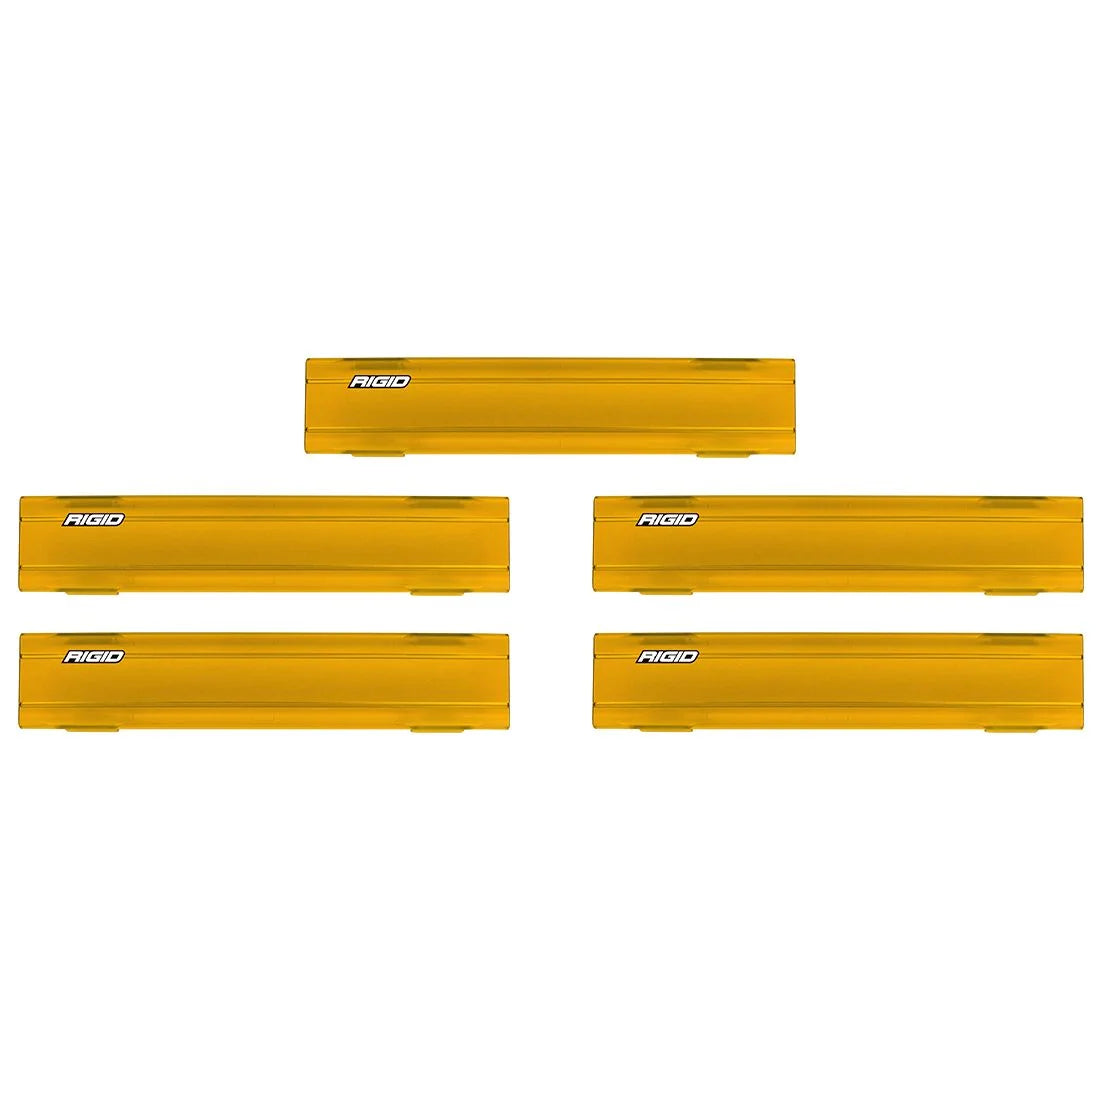 Rigid SR-Series Light Bar Covers (Sold in Sections) Sizes 6''-54'' (You will Need to Select Multiples)